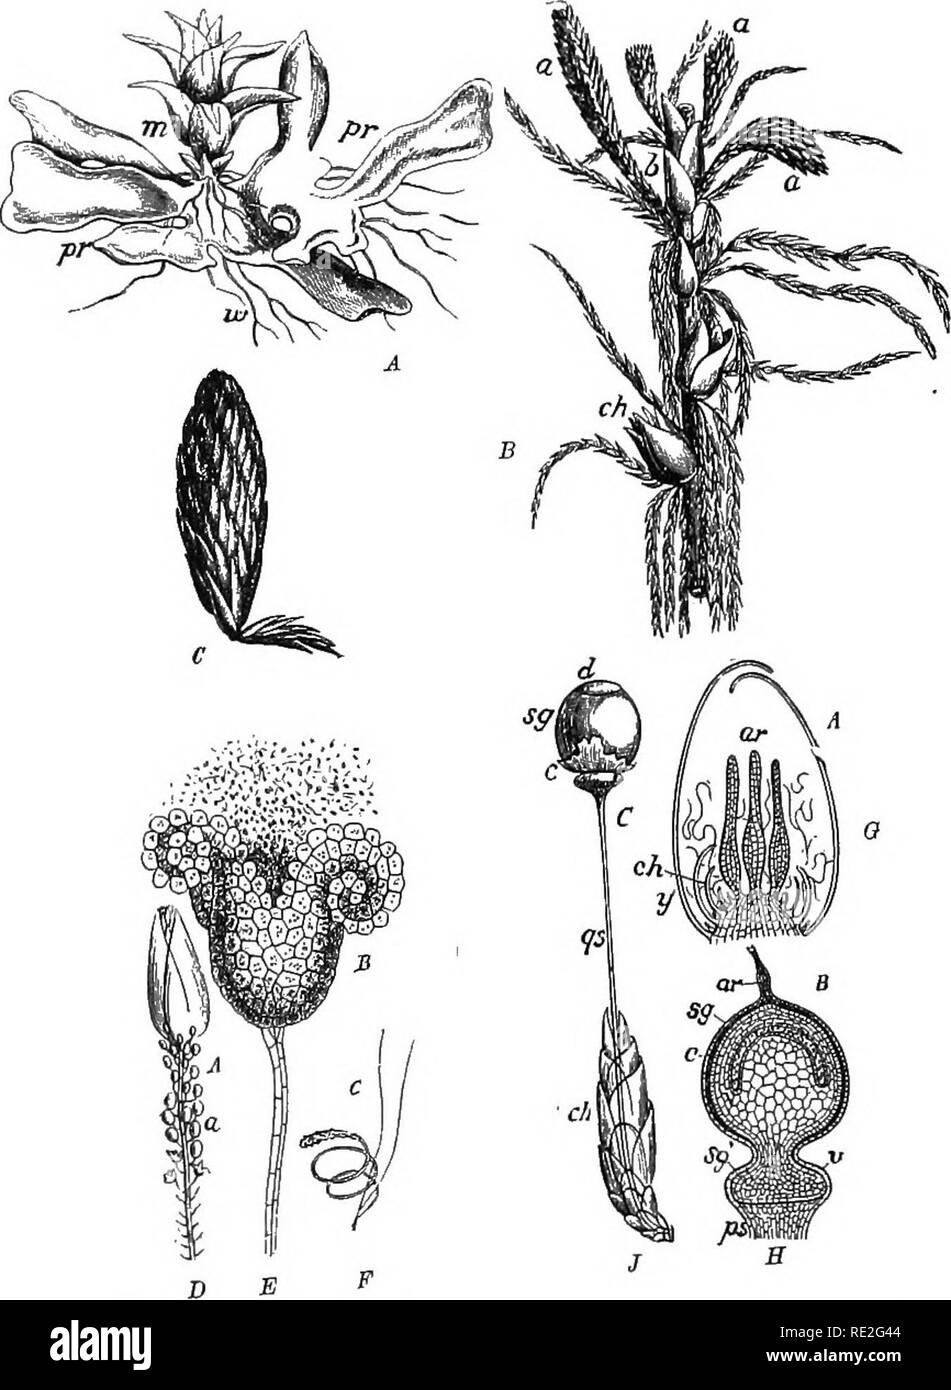 . Fundamentals of botany. Botany. 198 STRUCTURE AND LIFE HISTORIES. Fig. 143.—Sphagnum acutifolium, Ehrb. A, prothallus ipr), with a young leafy branch just developing from it; B, portion of a leafy plant; a, male cones; ch, female branches; C, male branch or cone, enlarged with a portion of the vegetative branch adhering to its base; D, the same, with a portion of the leaves removed so as to disclose the antheridia; E, an- theridium discharging spores; F, a single sperm; G, longitudinal section of a female branch, showing the archegonia {ar); H, longitudinal section through a sporogonium; sg^ Stock Photo